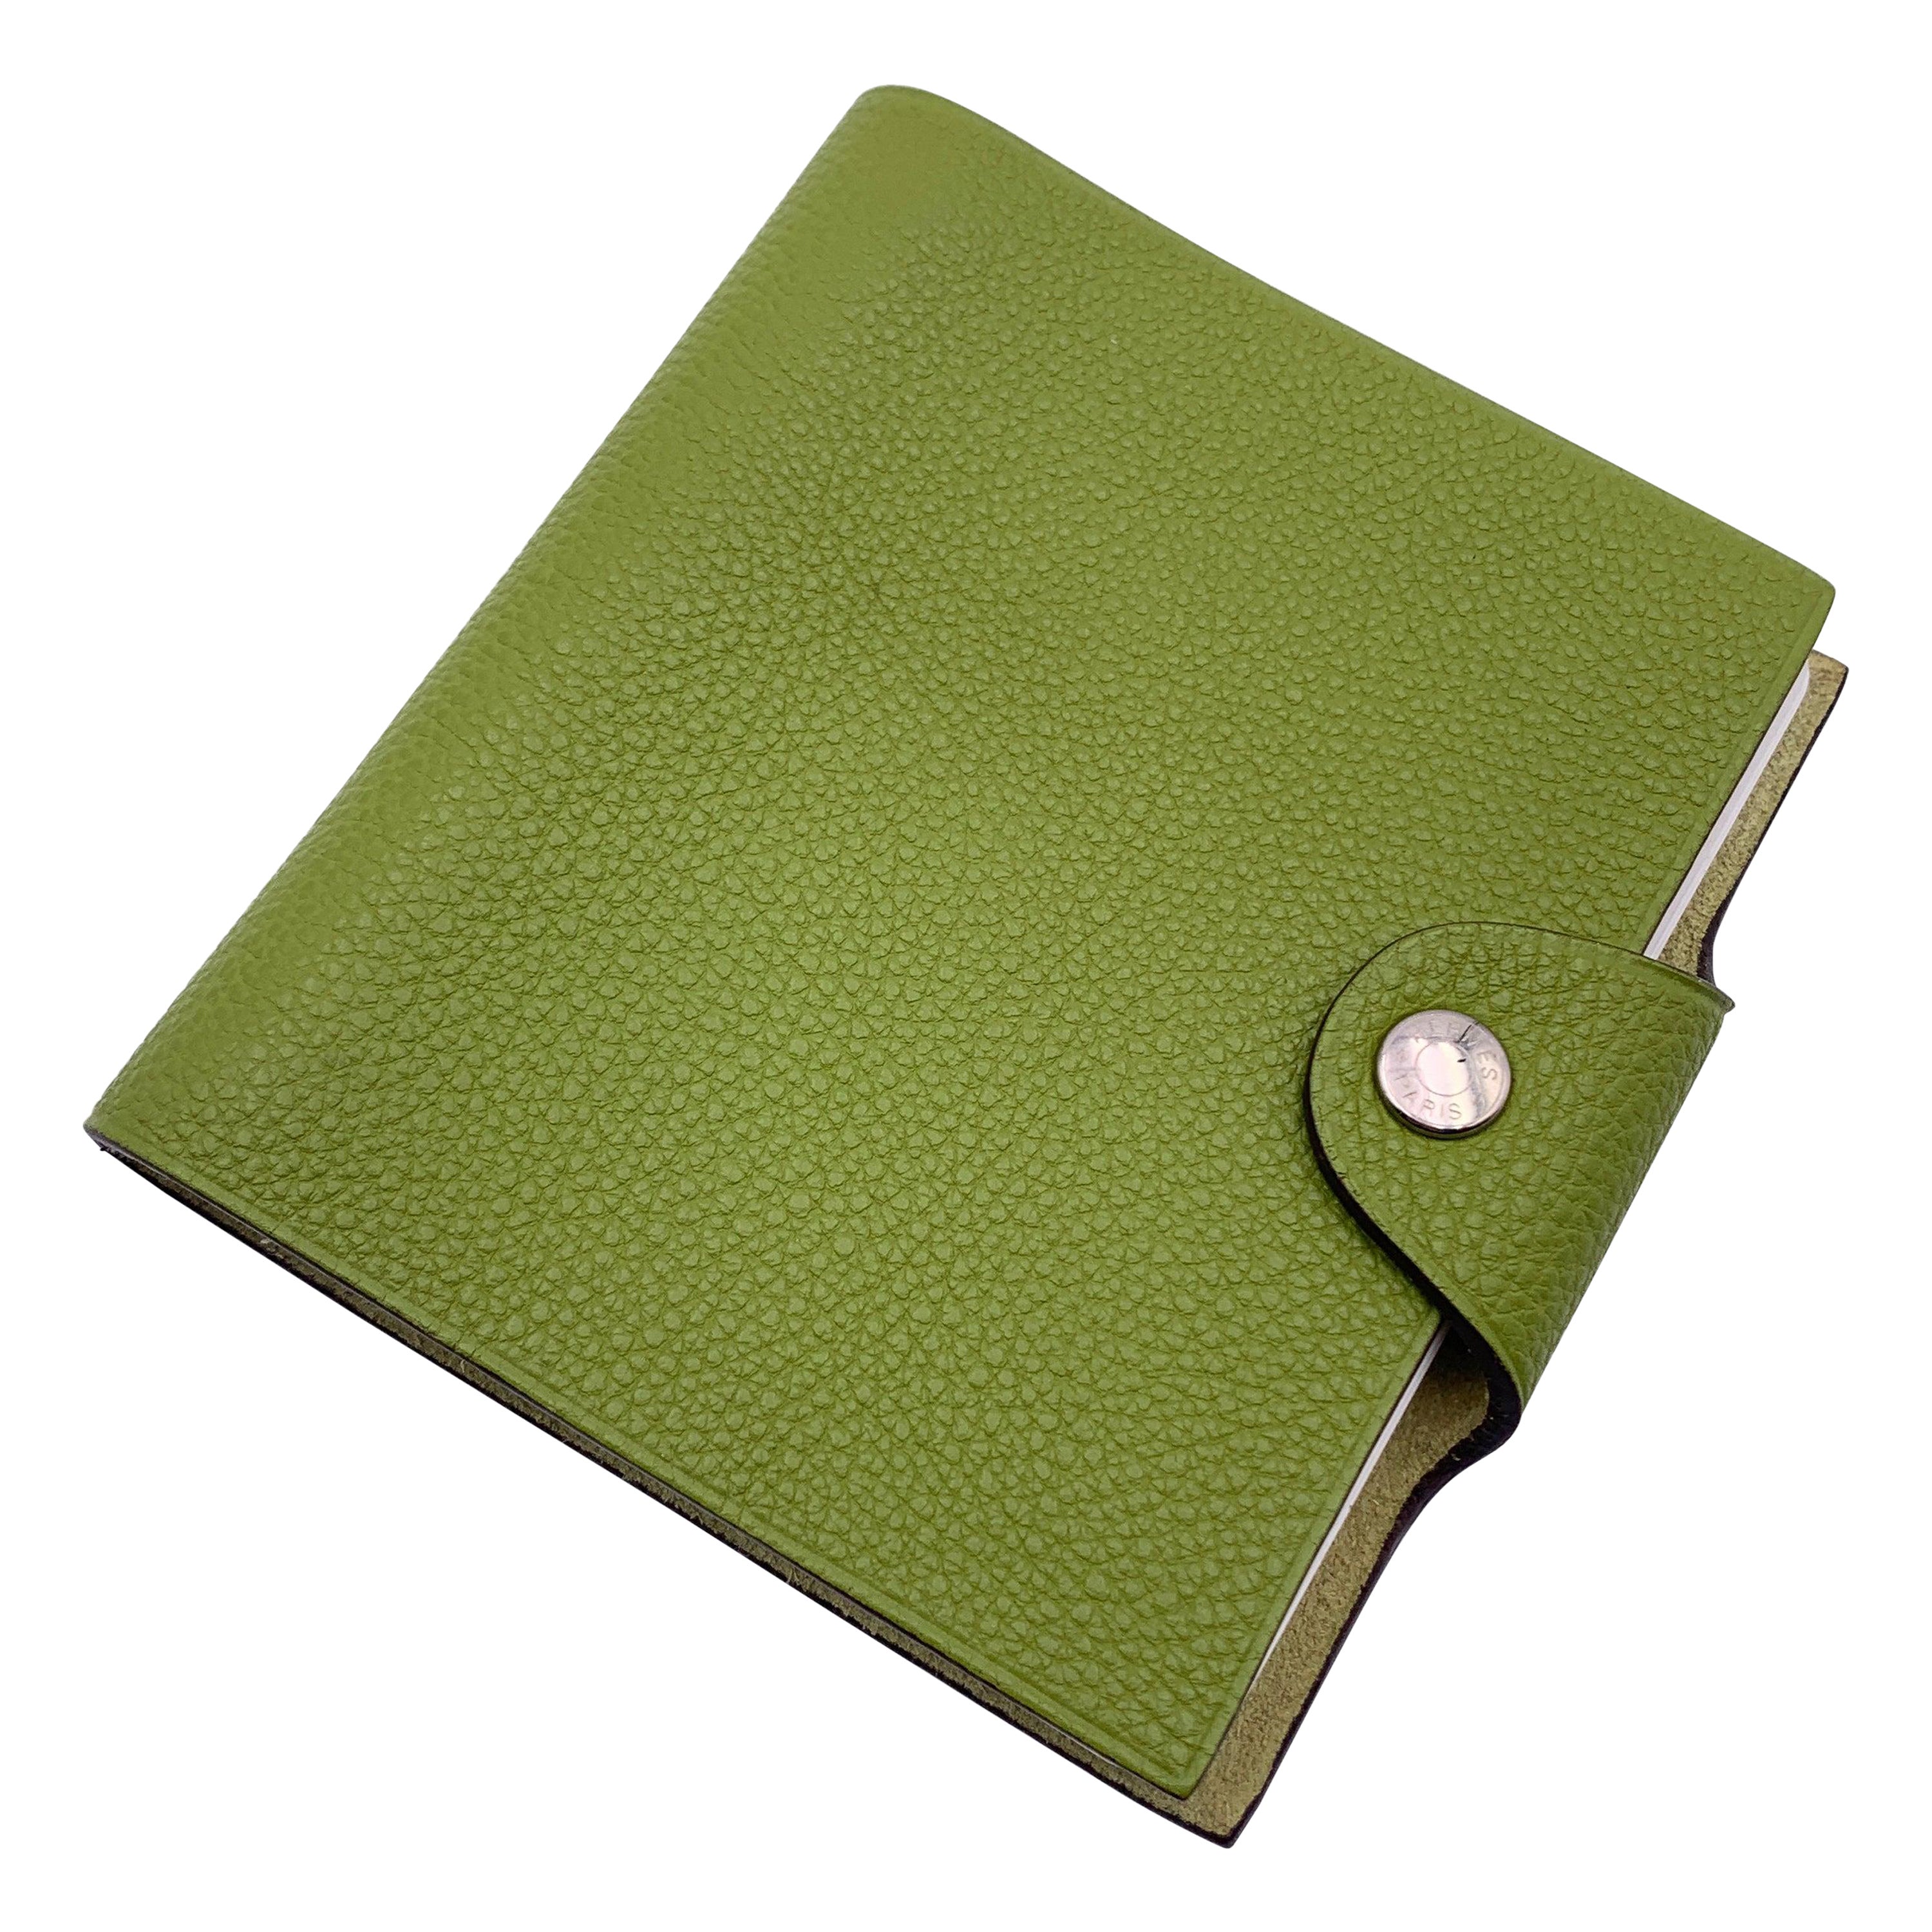 Hermes Green Togo Leather Ulysse Mini Notebook cover with Refill For Sale